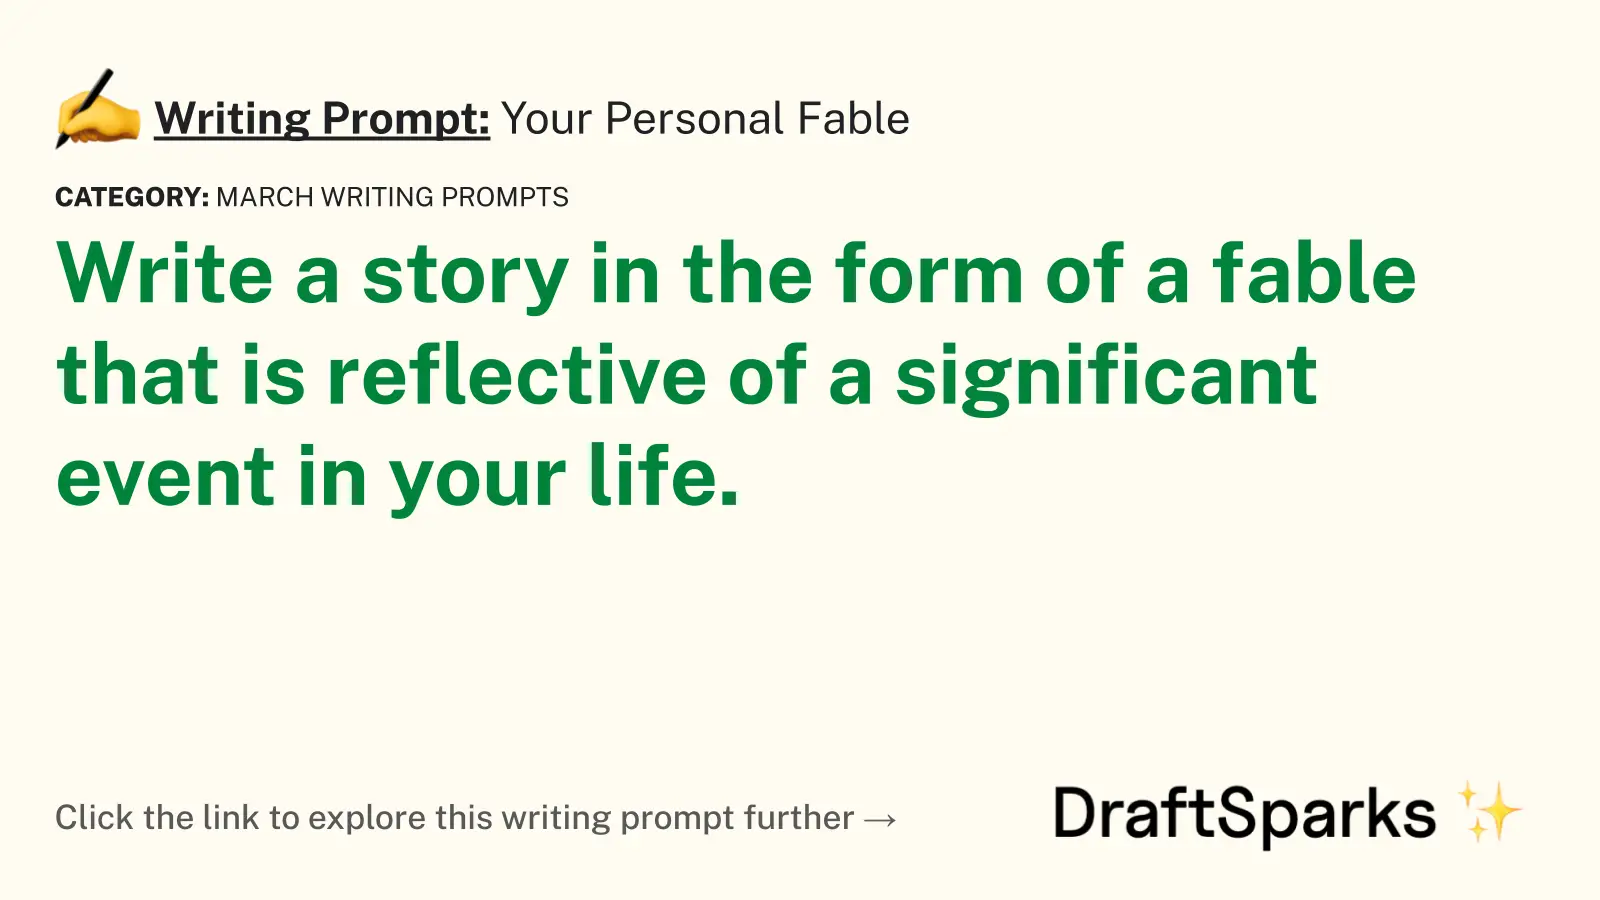 Your Personal Fable